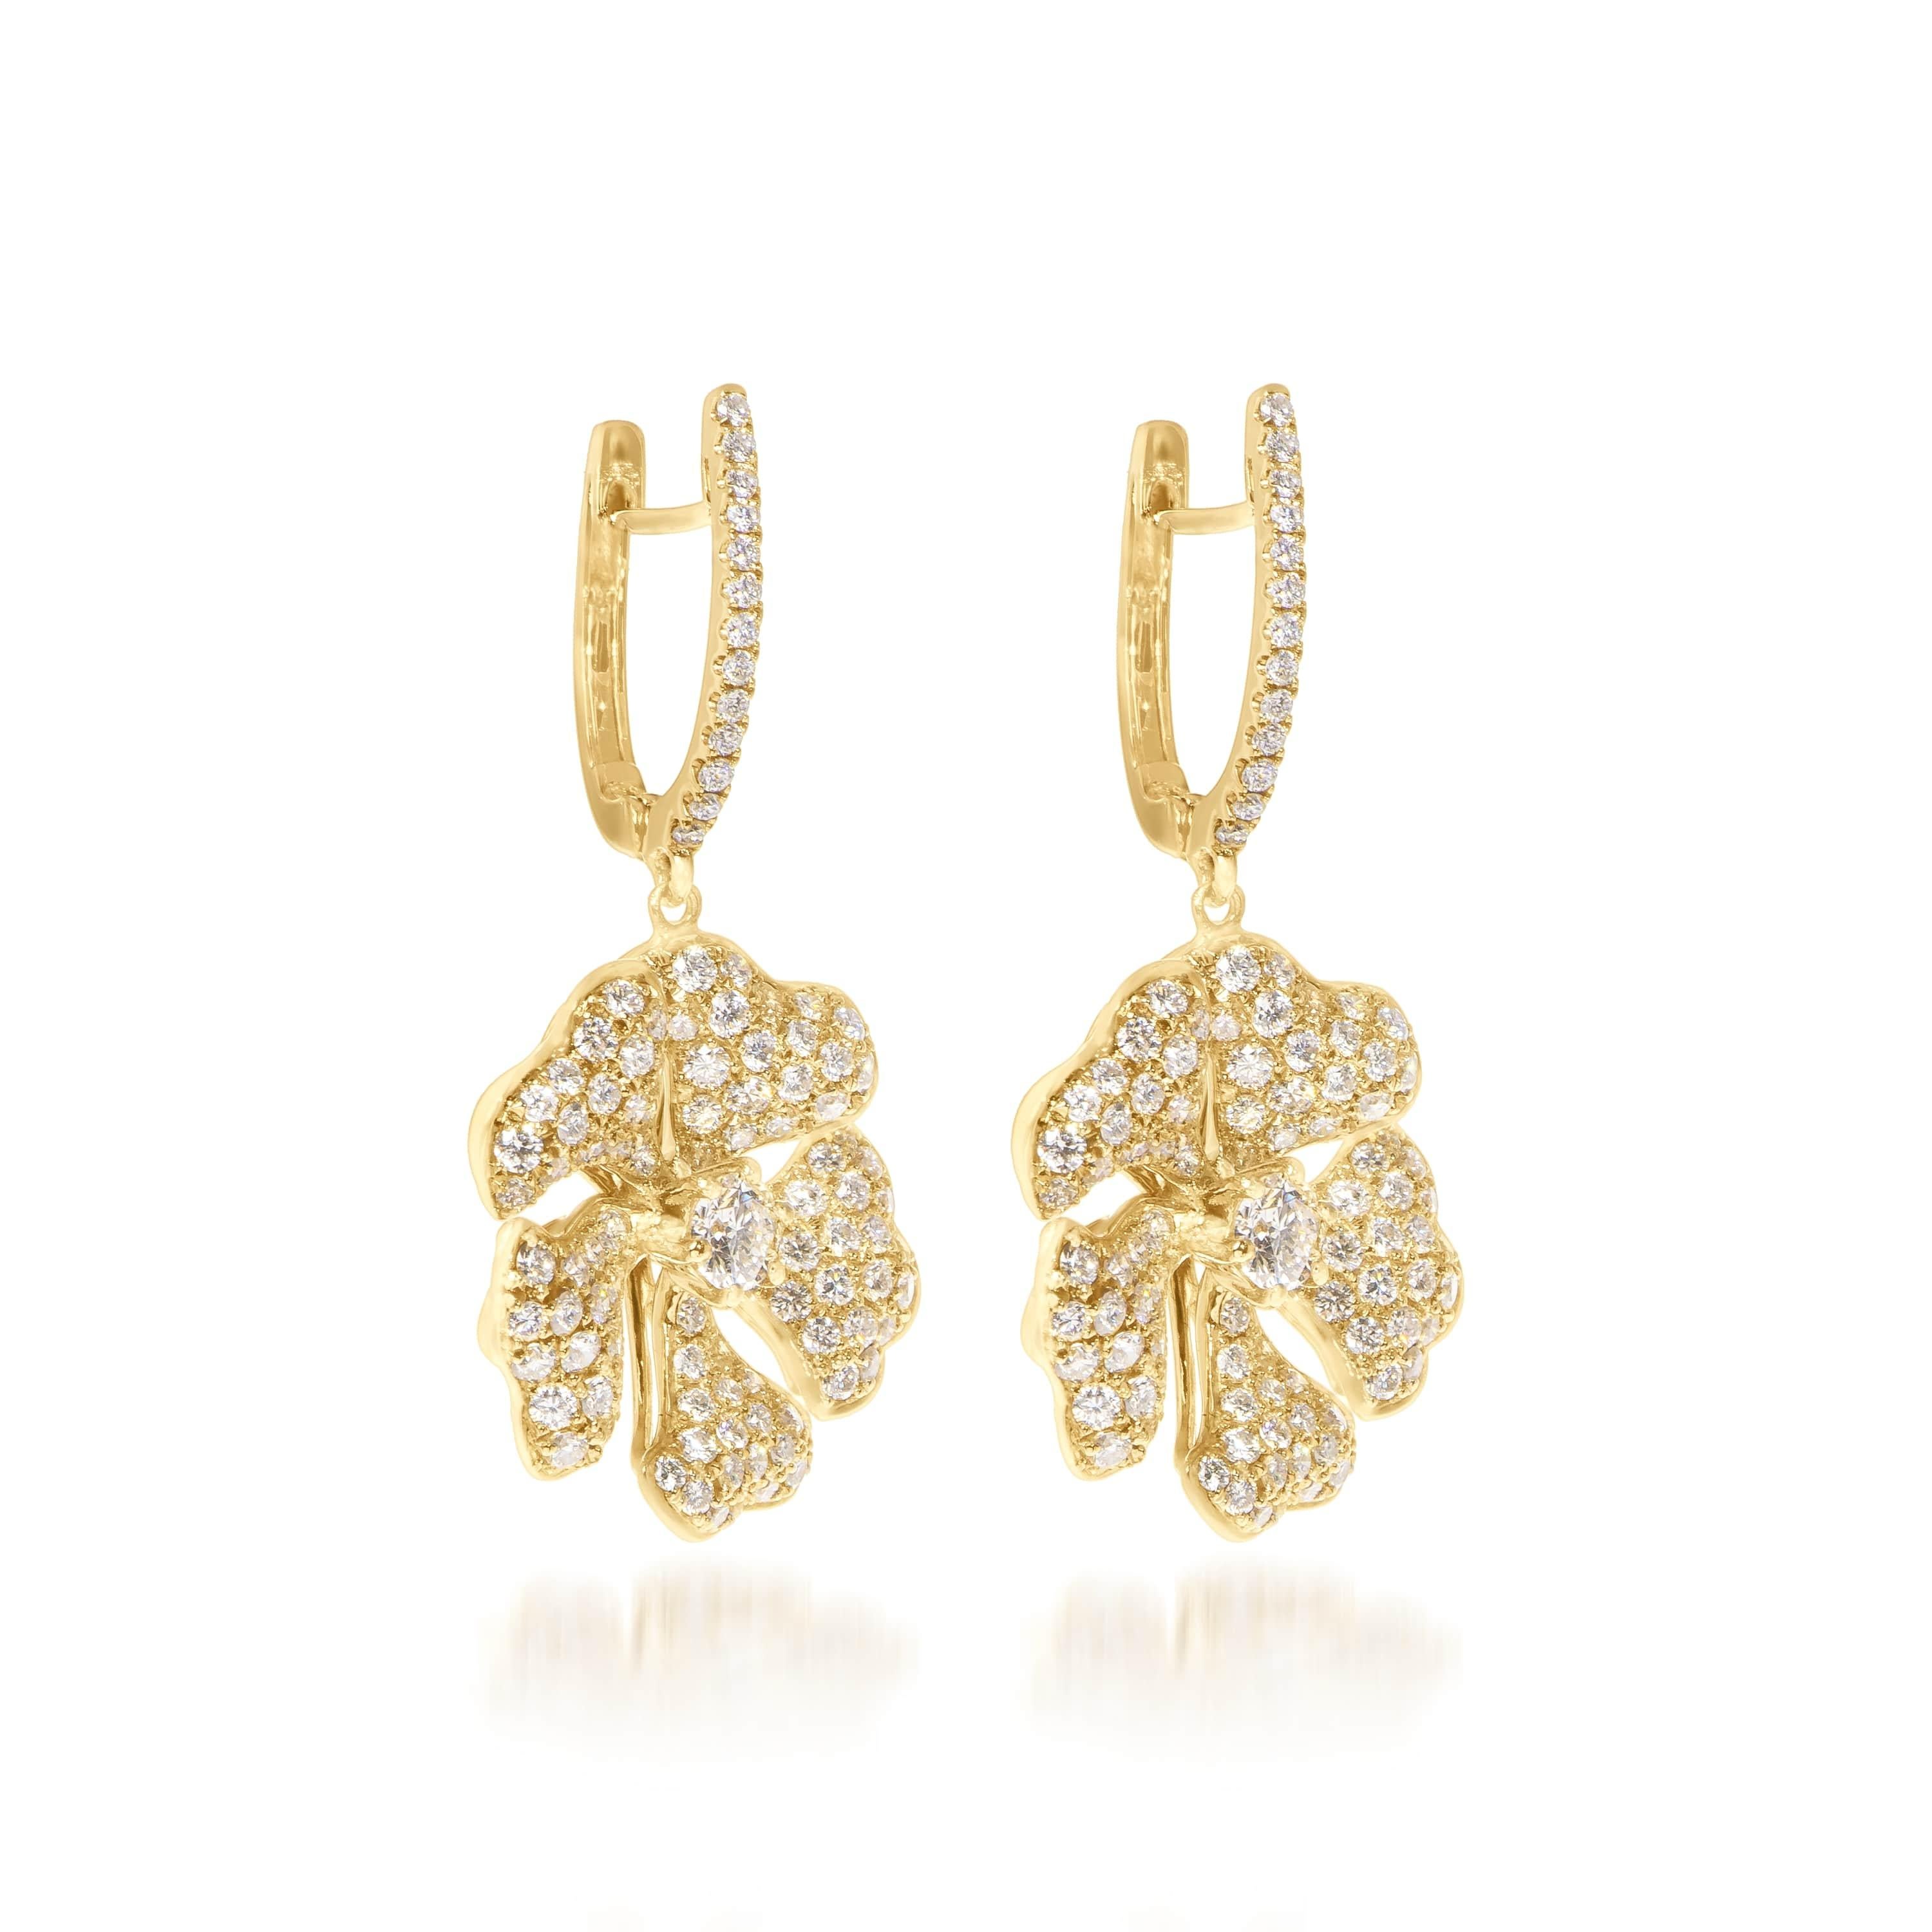 Bloom Gold and Pavé Diamond Drop Flower Earrings in 18K Yellow Gold 

Inspired by the exquisite petals of the alpine cinquefoil flower, the Bloom collection combines the richness of diamonds and precious metals with the light versatility of this